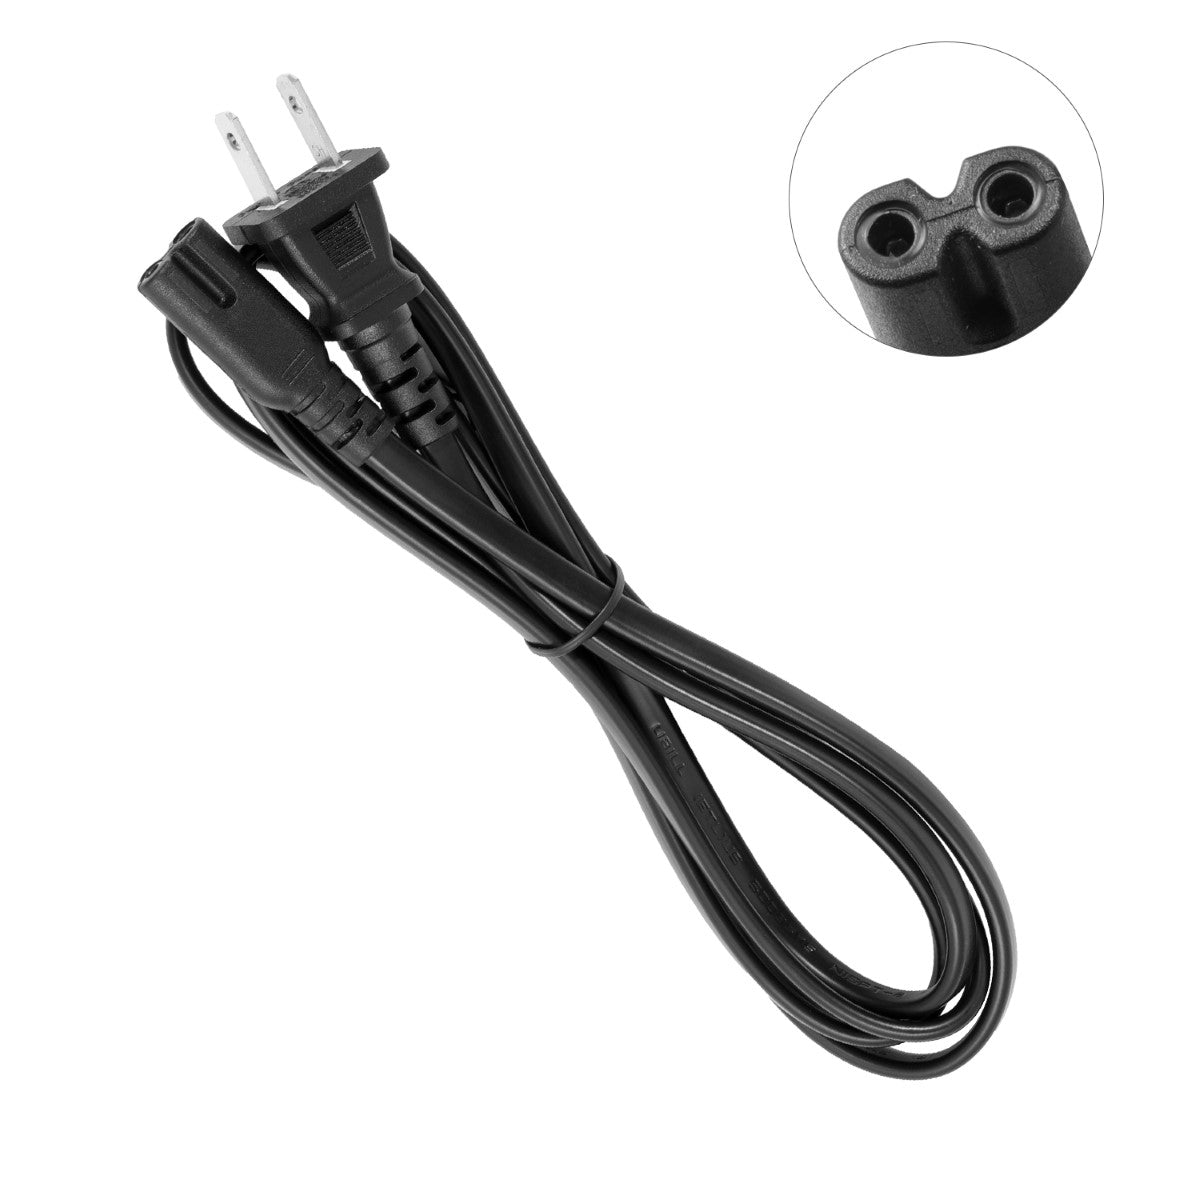 Power Cable for HP OfficeJet Pro 9018 All-in-One Wireless Printer.